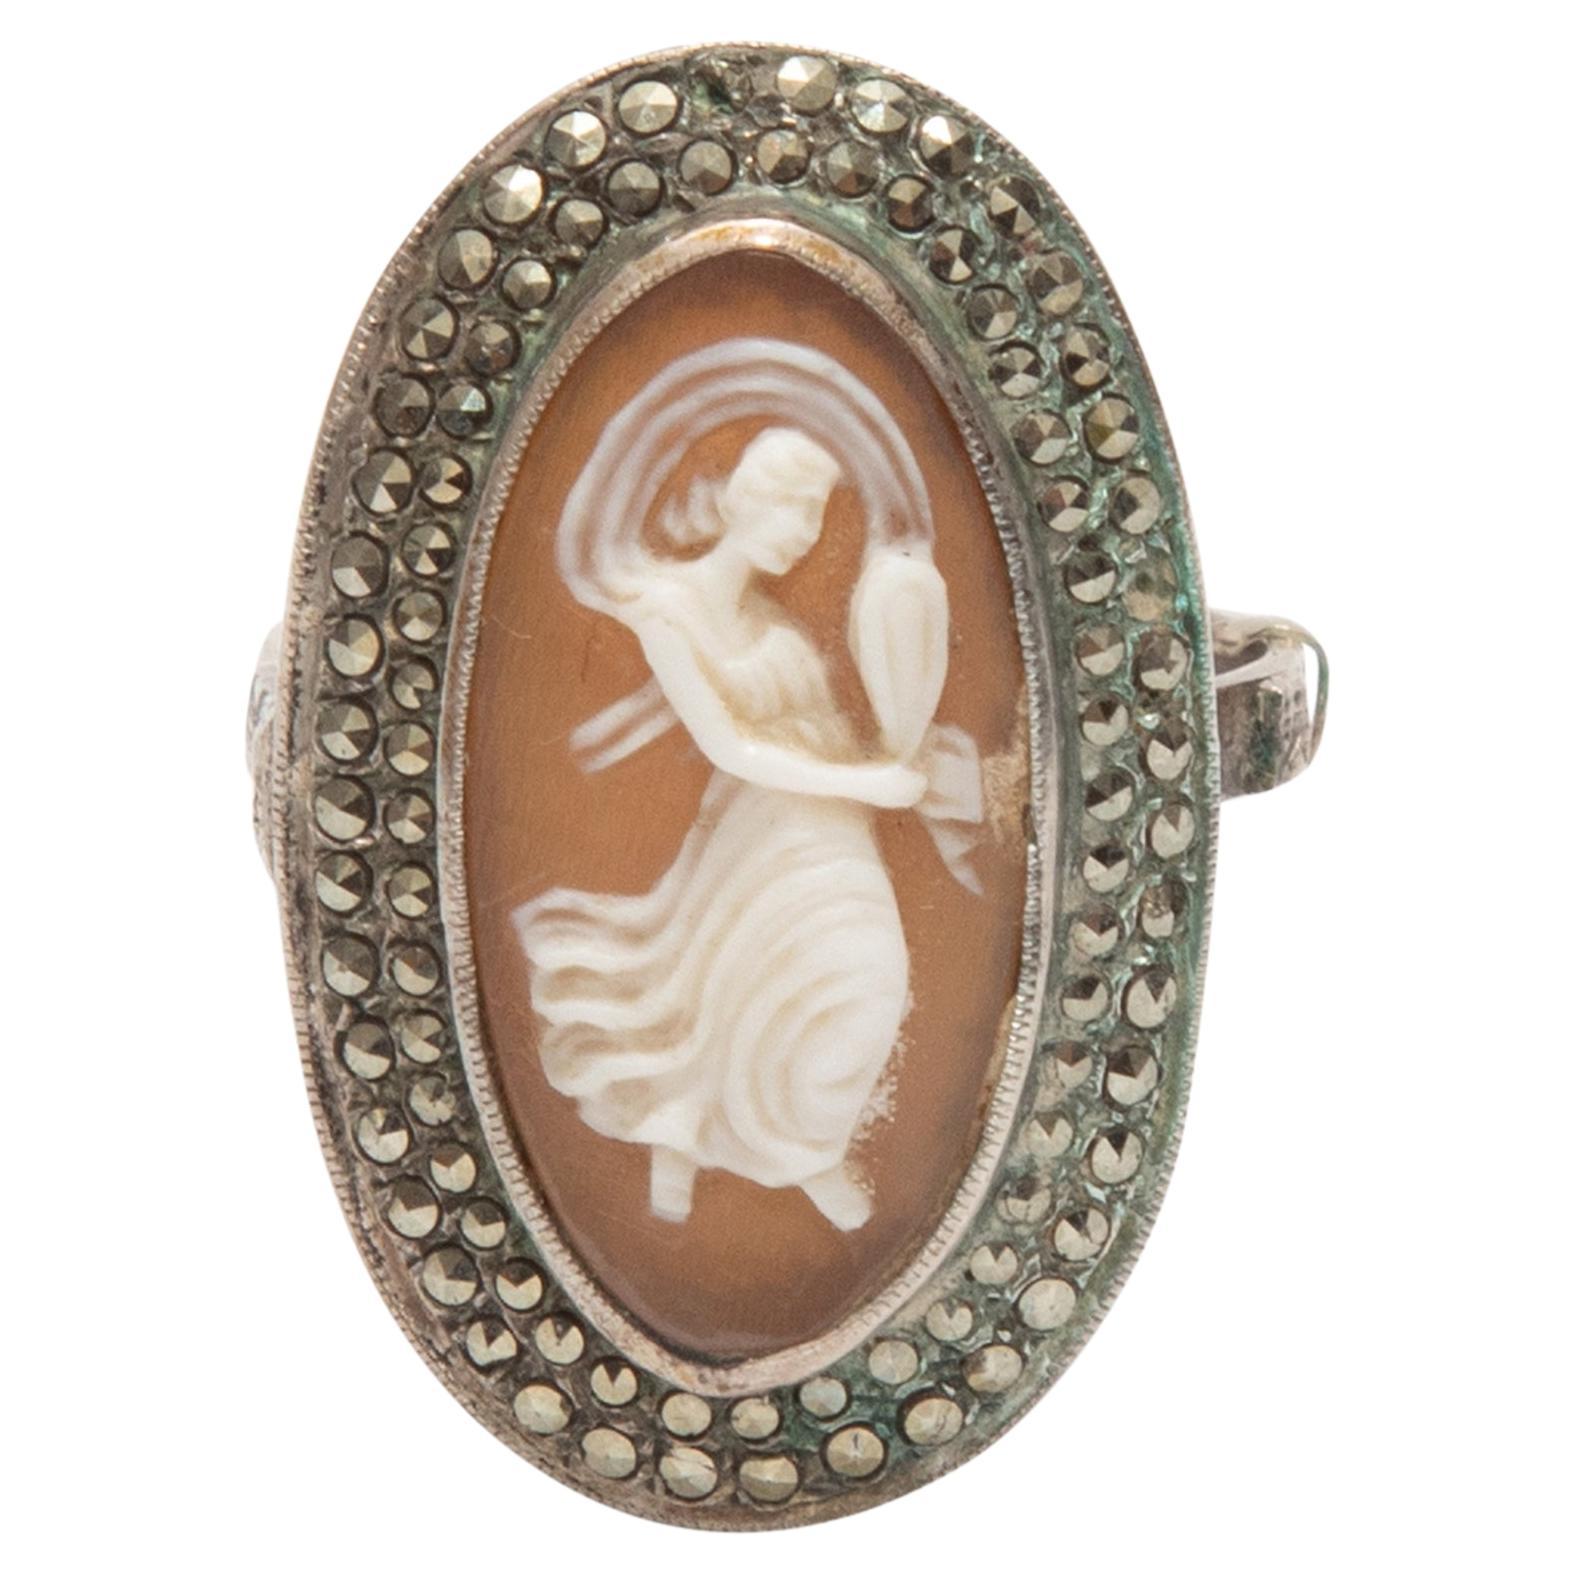 What era is cameo jewelry from?